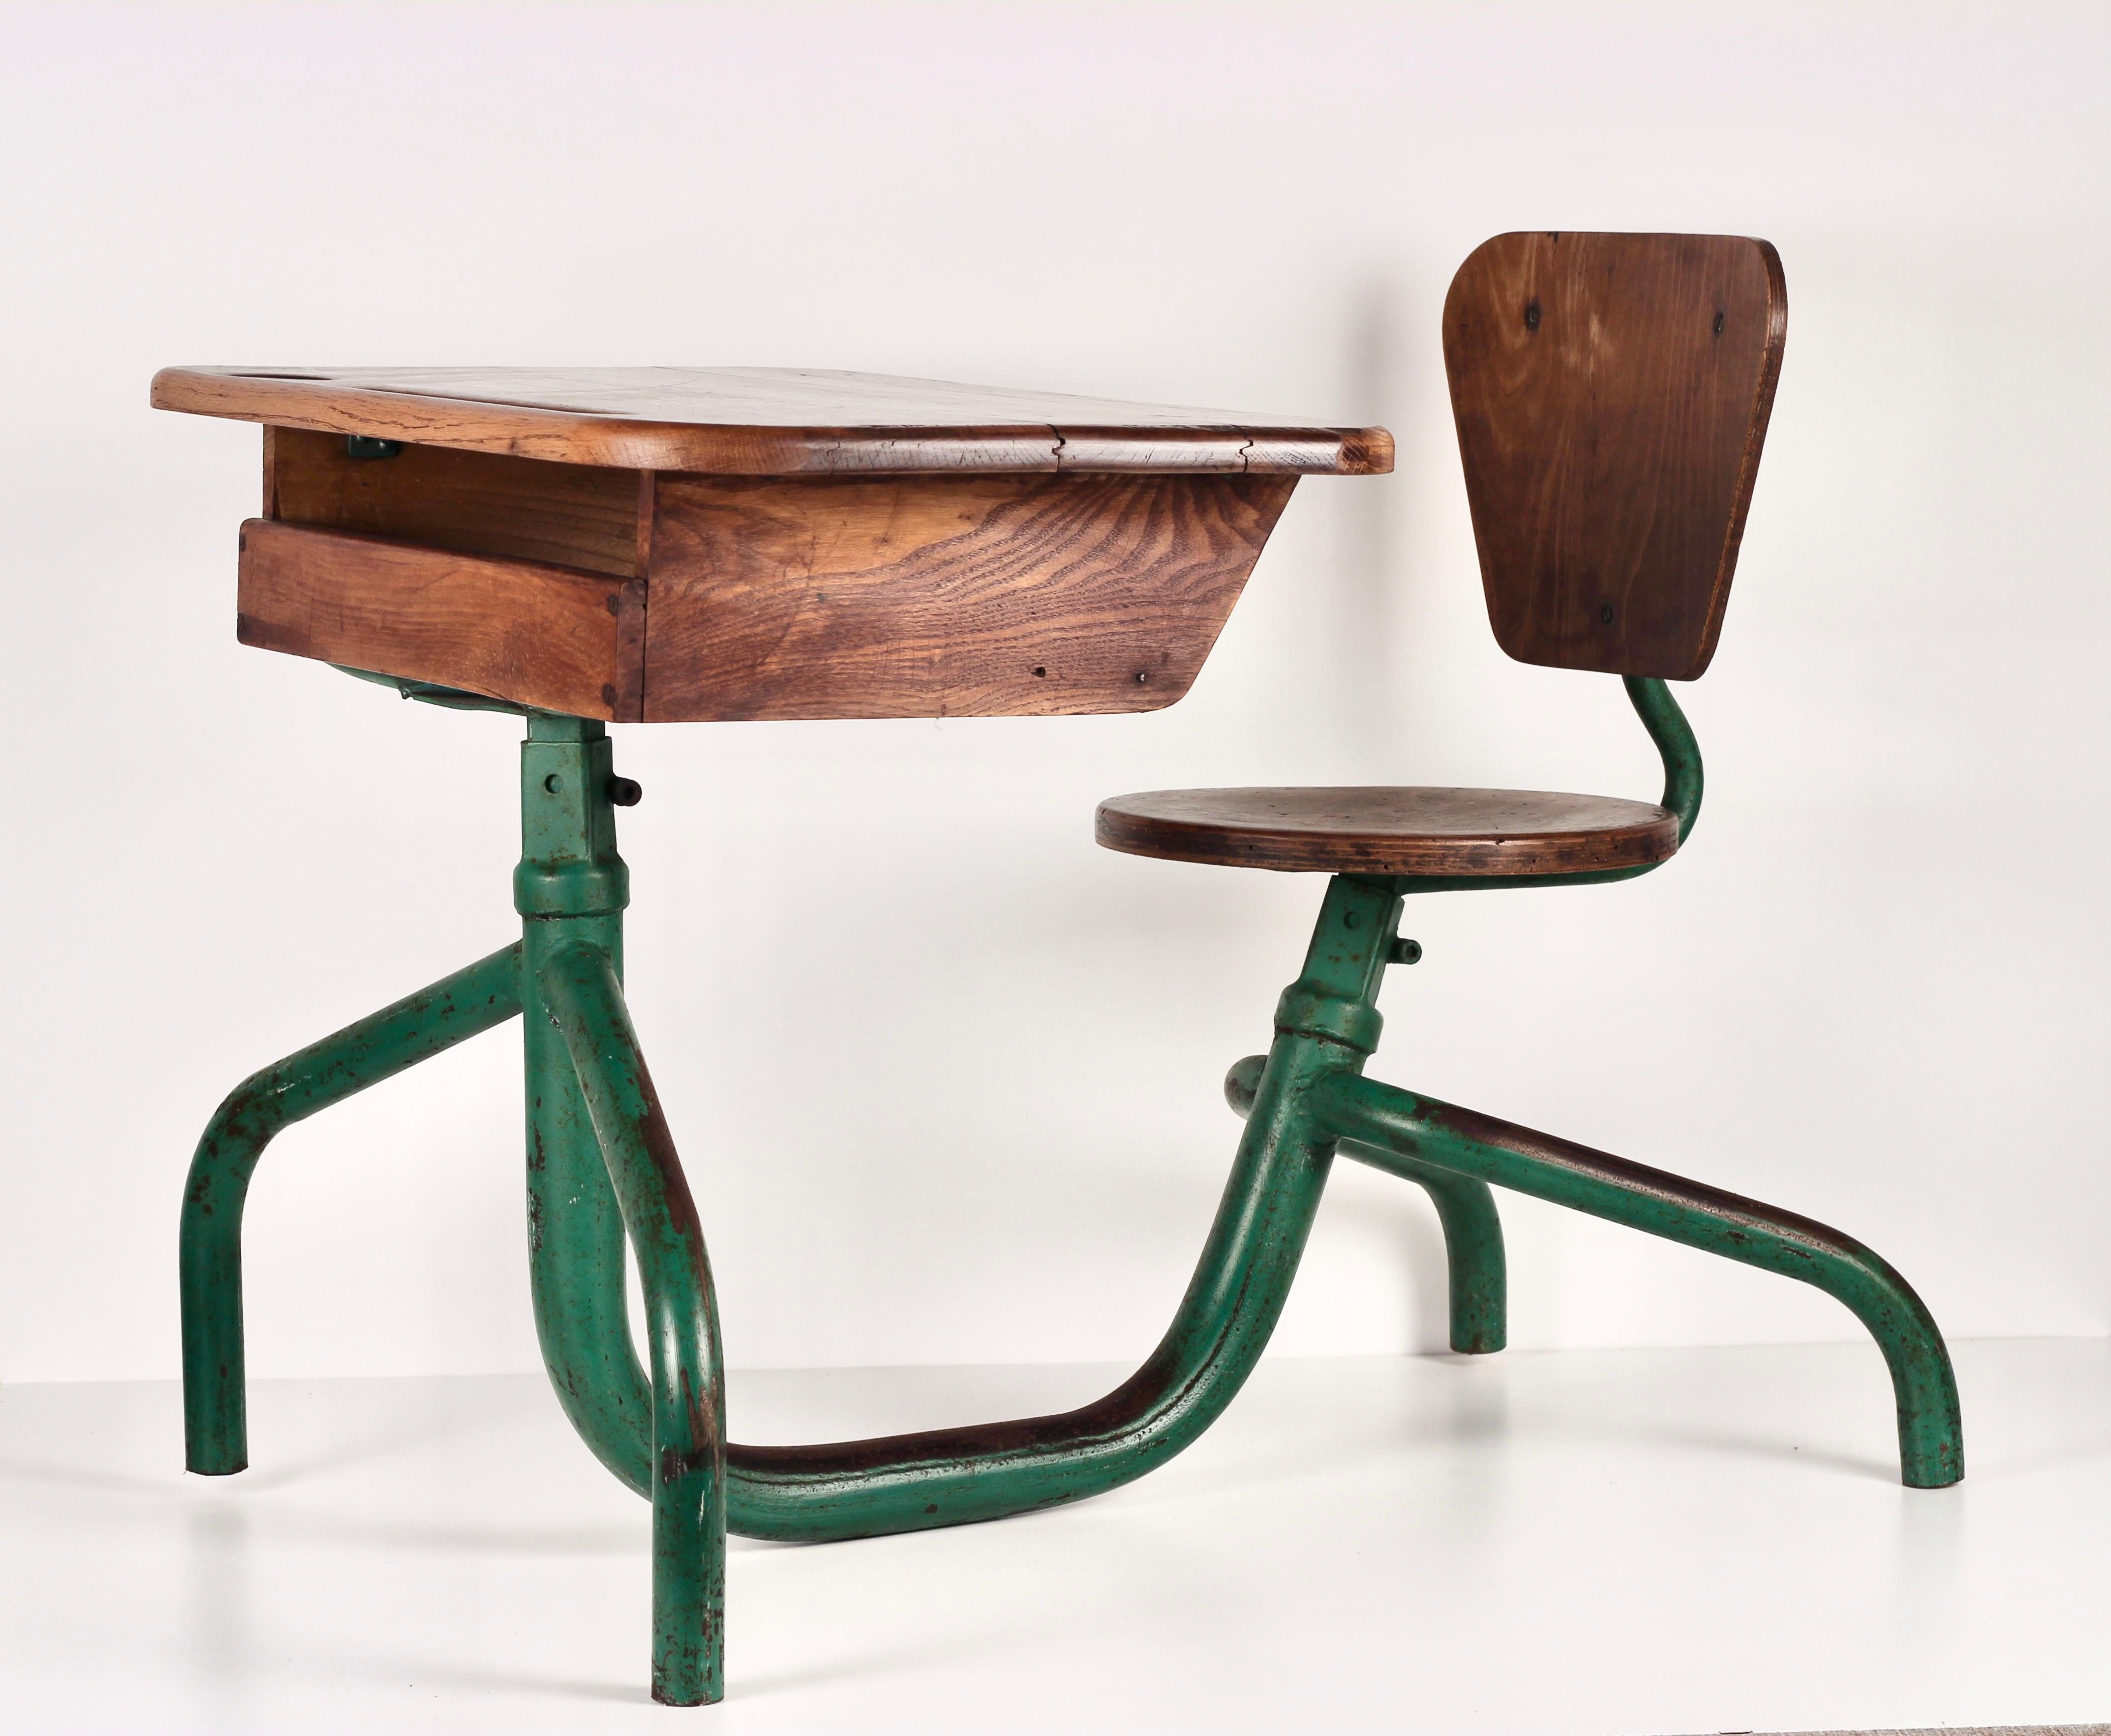 An original 1950’s French School desk, made from Oak, Ply and Steel in the style of Jean Prouvé. 
Green lacquered metal base with original solid oak top and seat.
In very good condition, showing age related wear which creates a beautiful patina and